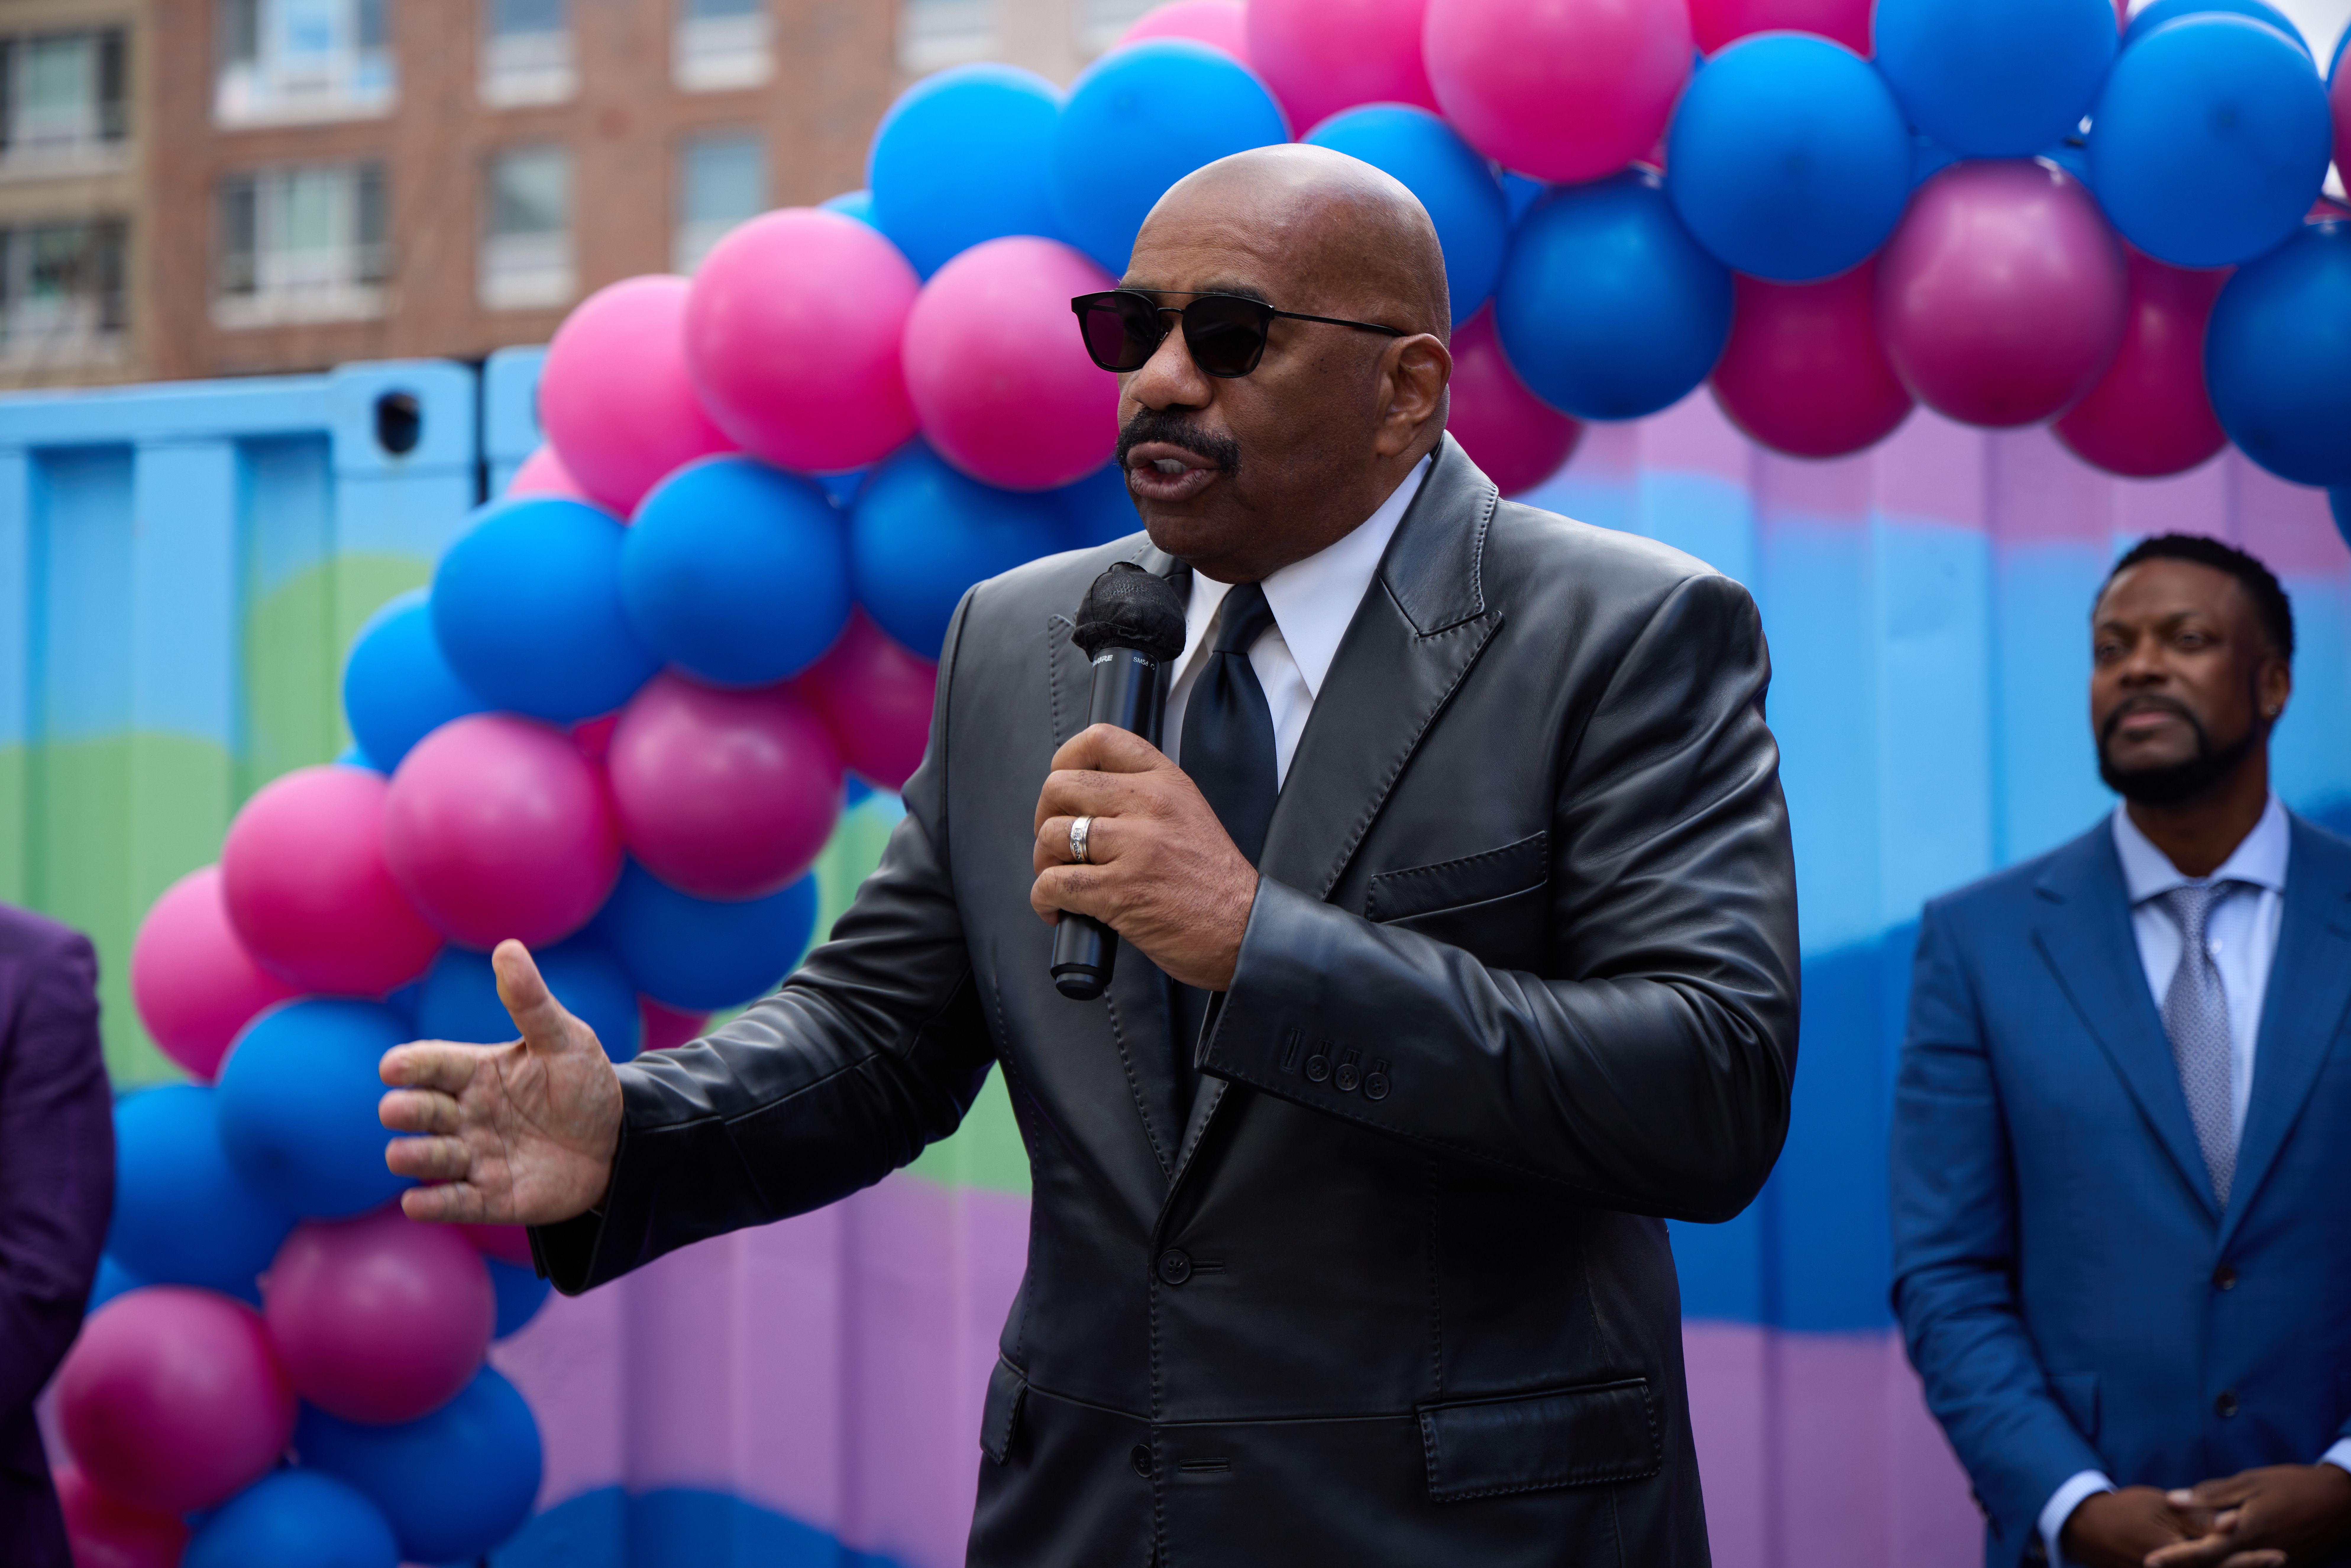 Steve Harvey giving remarks at the ribbon cutting event.